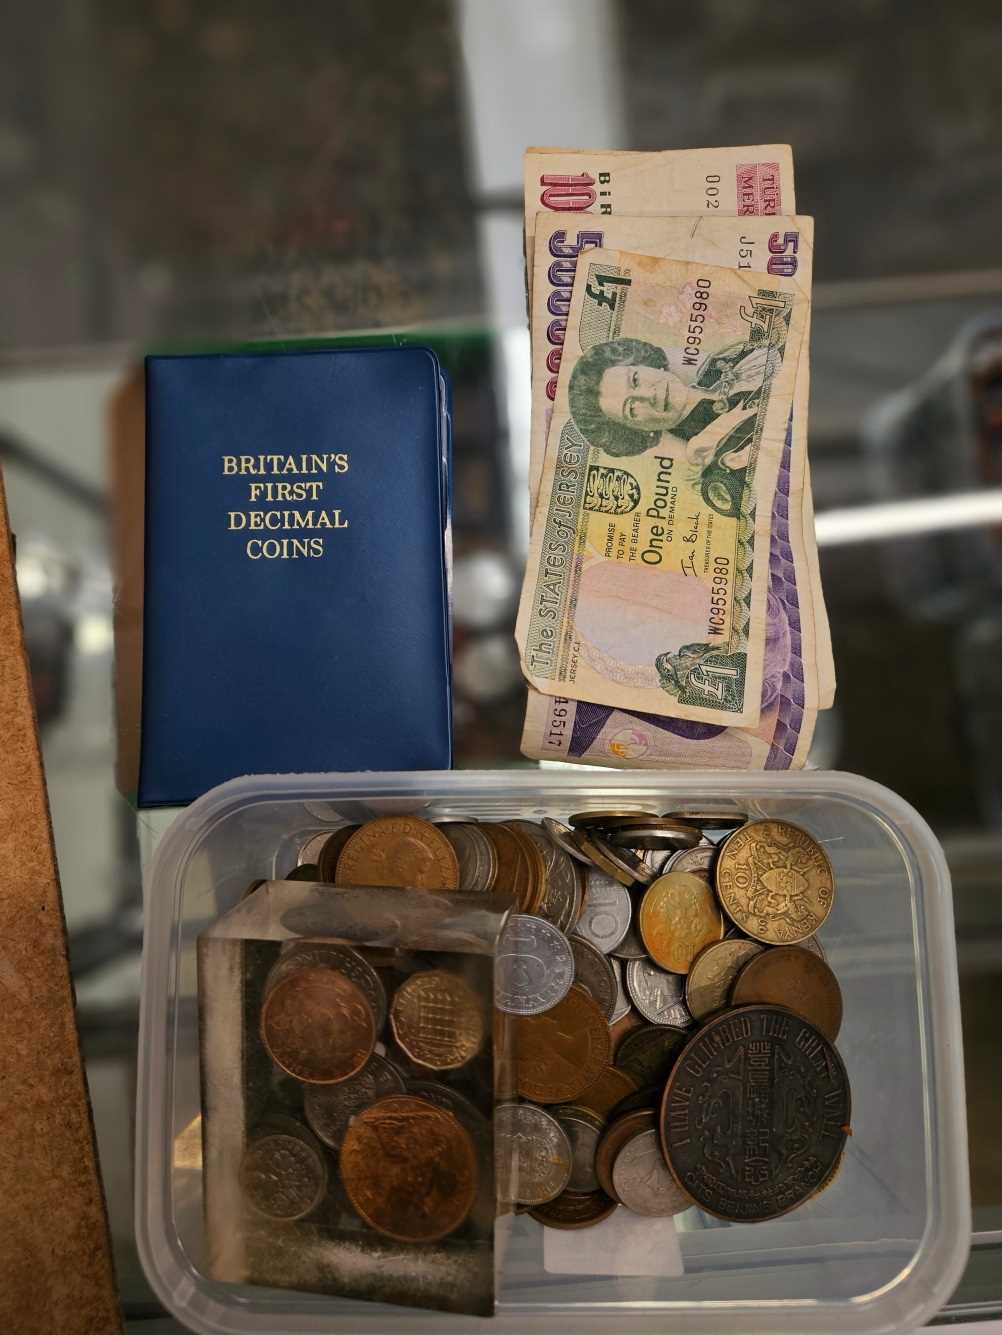 A collection of world coins and banknotes.